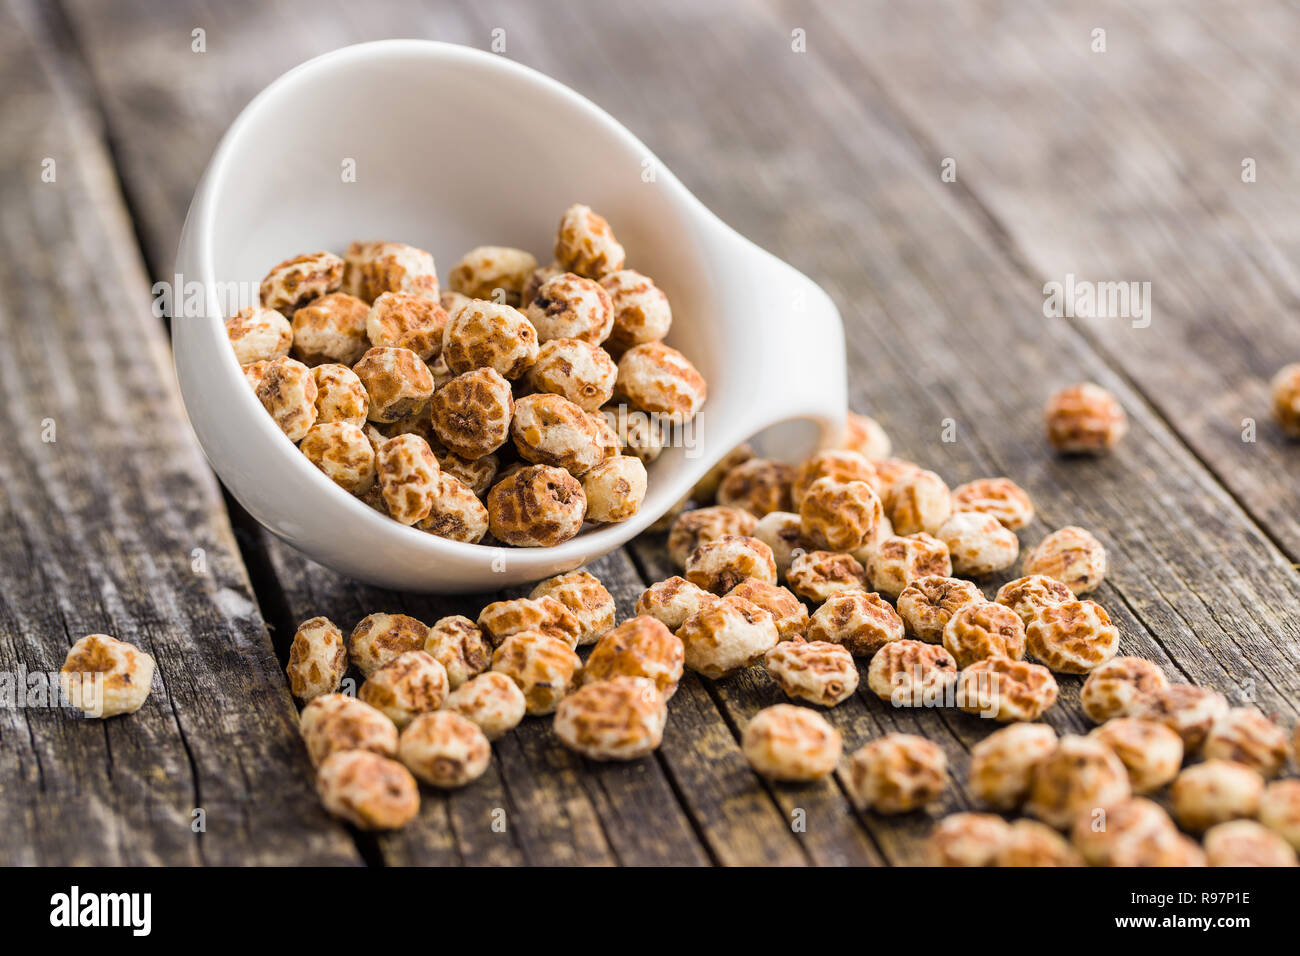 Tiger nuts. Tasty chufa nuts. Healthy superfood on old wooden table. Stock Photo